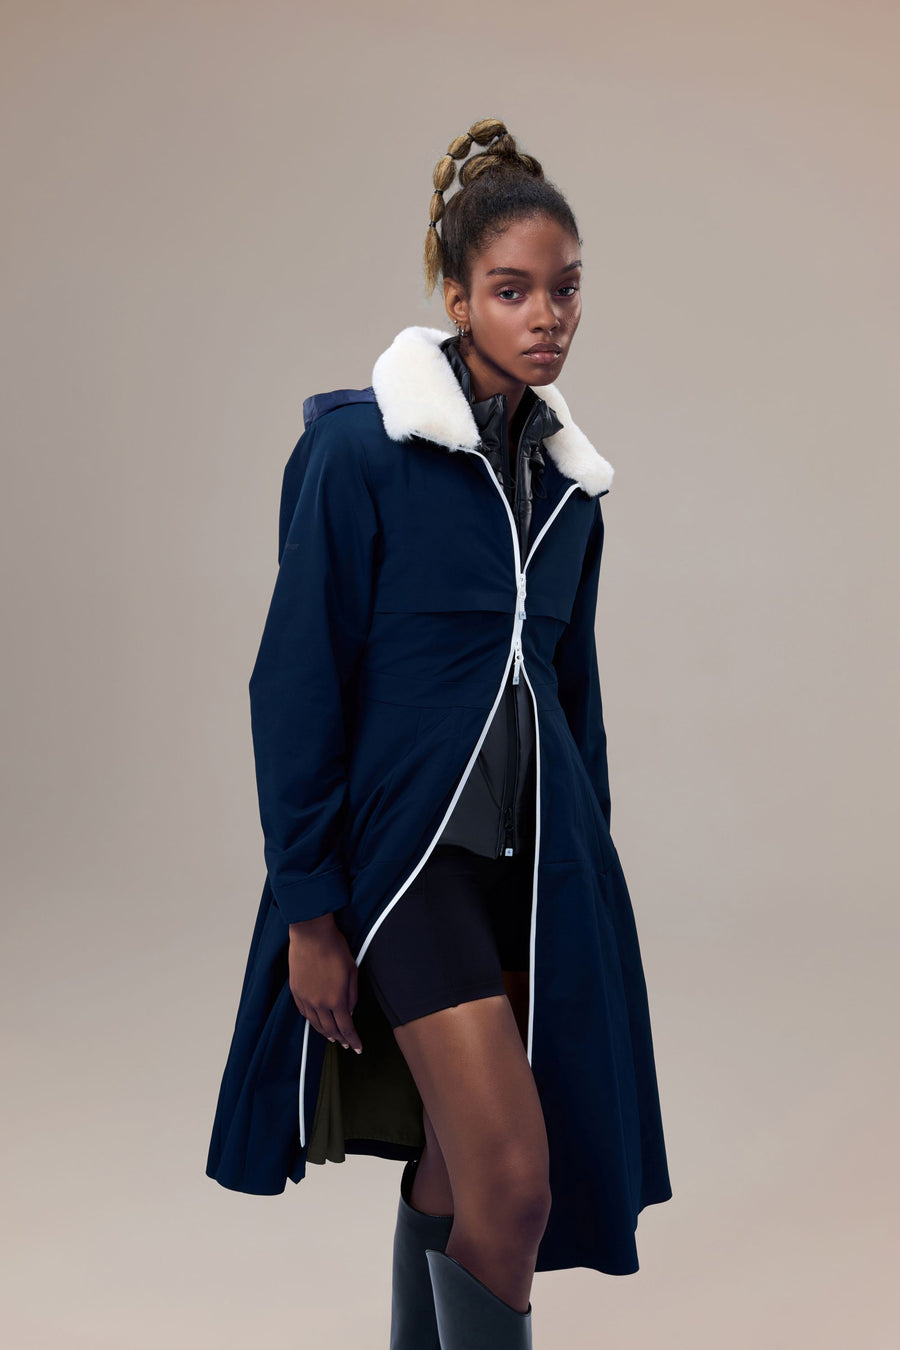 Camelia Water-Resistent Parka with Faux Fur Collar and Petticoat-Inspired Fishbones